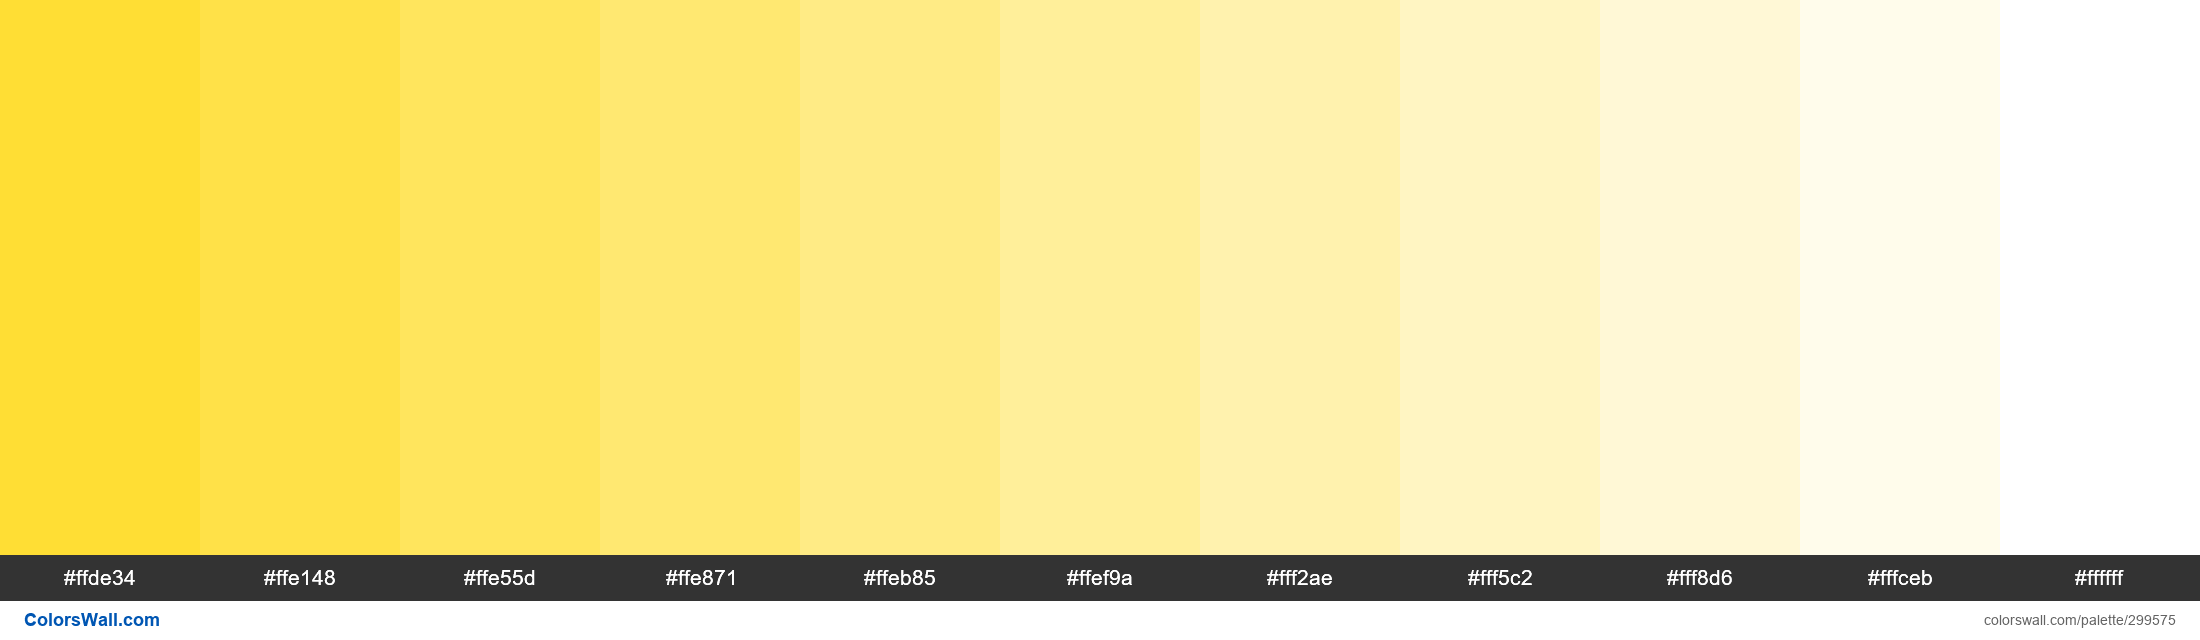 Emoji Yellow colors palette - ColorsWall